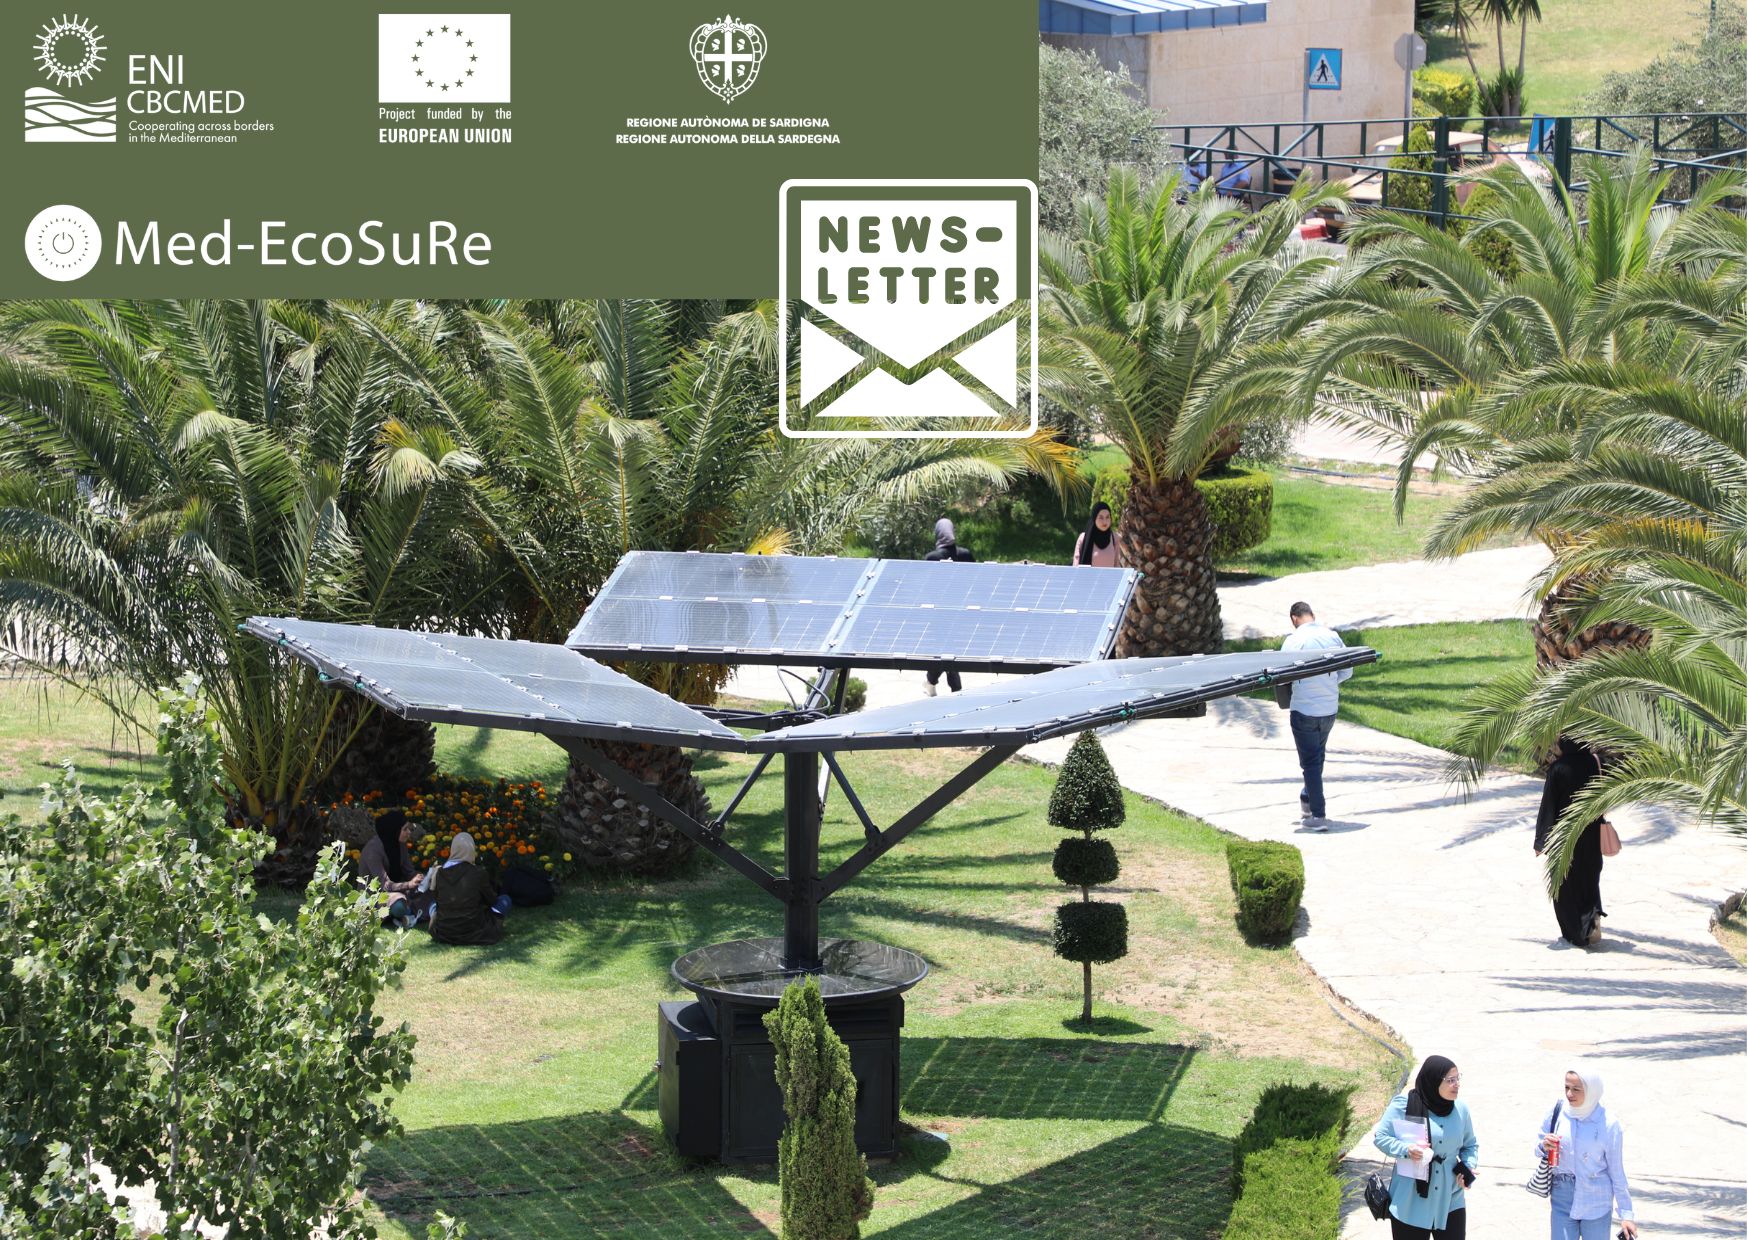 Med-EcoSuRe fifth newsletter highlights the renovation process proposed for a green transition in the built environment